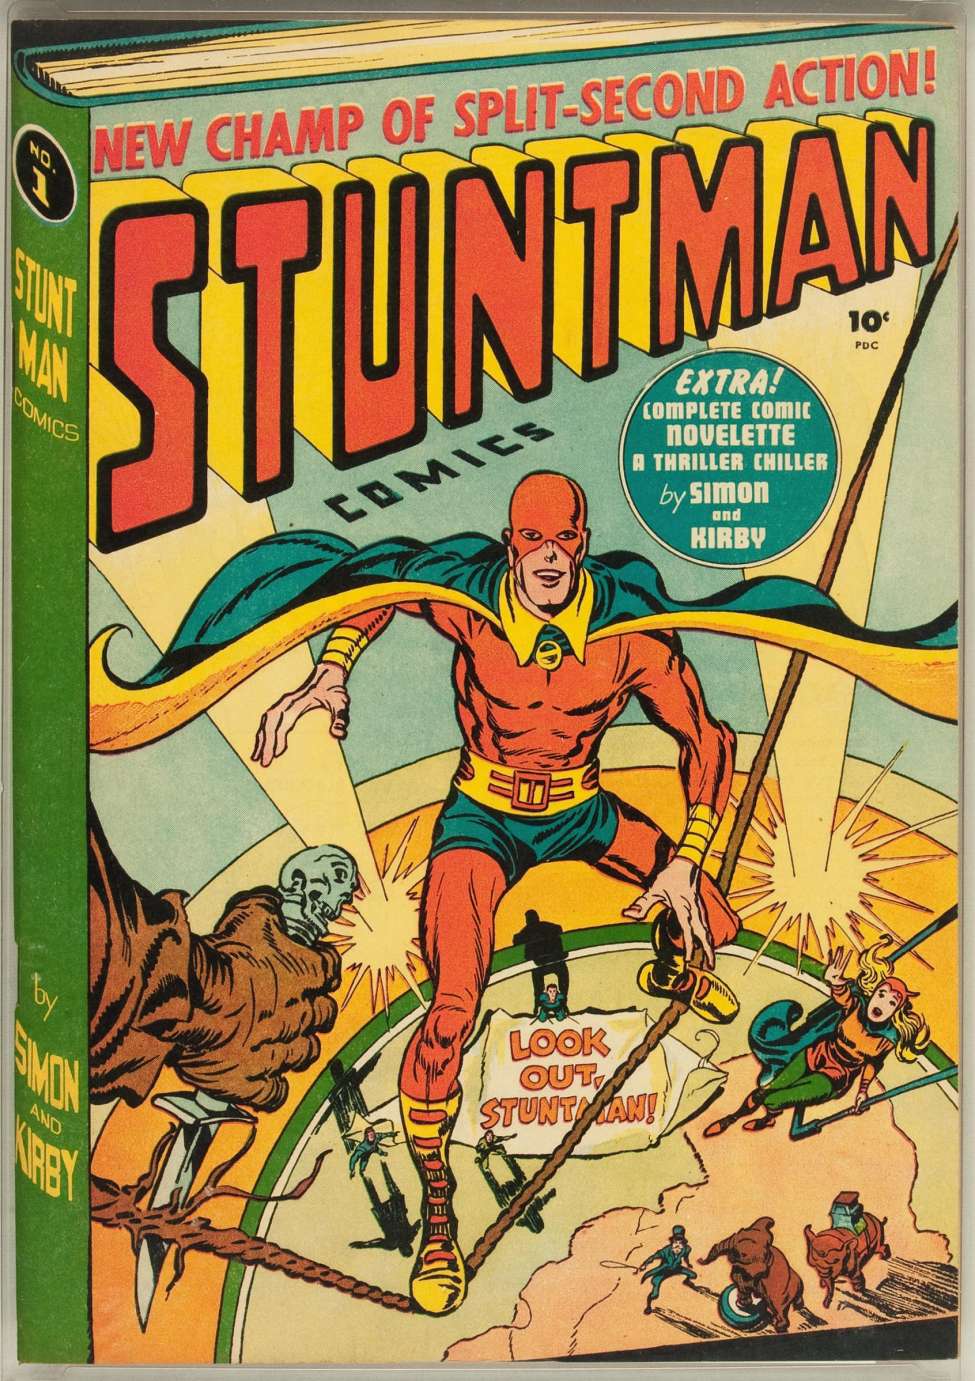 Book Cover For Stuntman 1